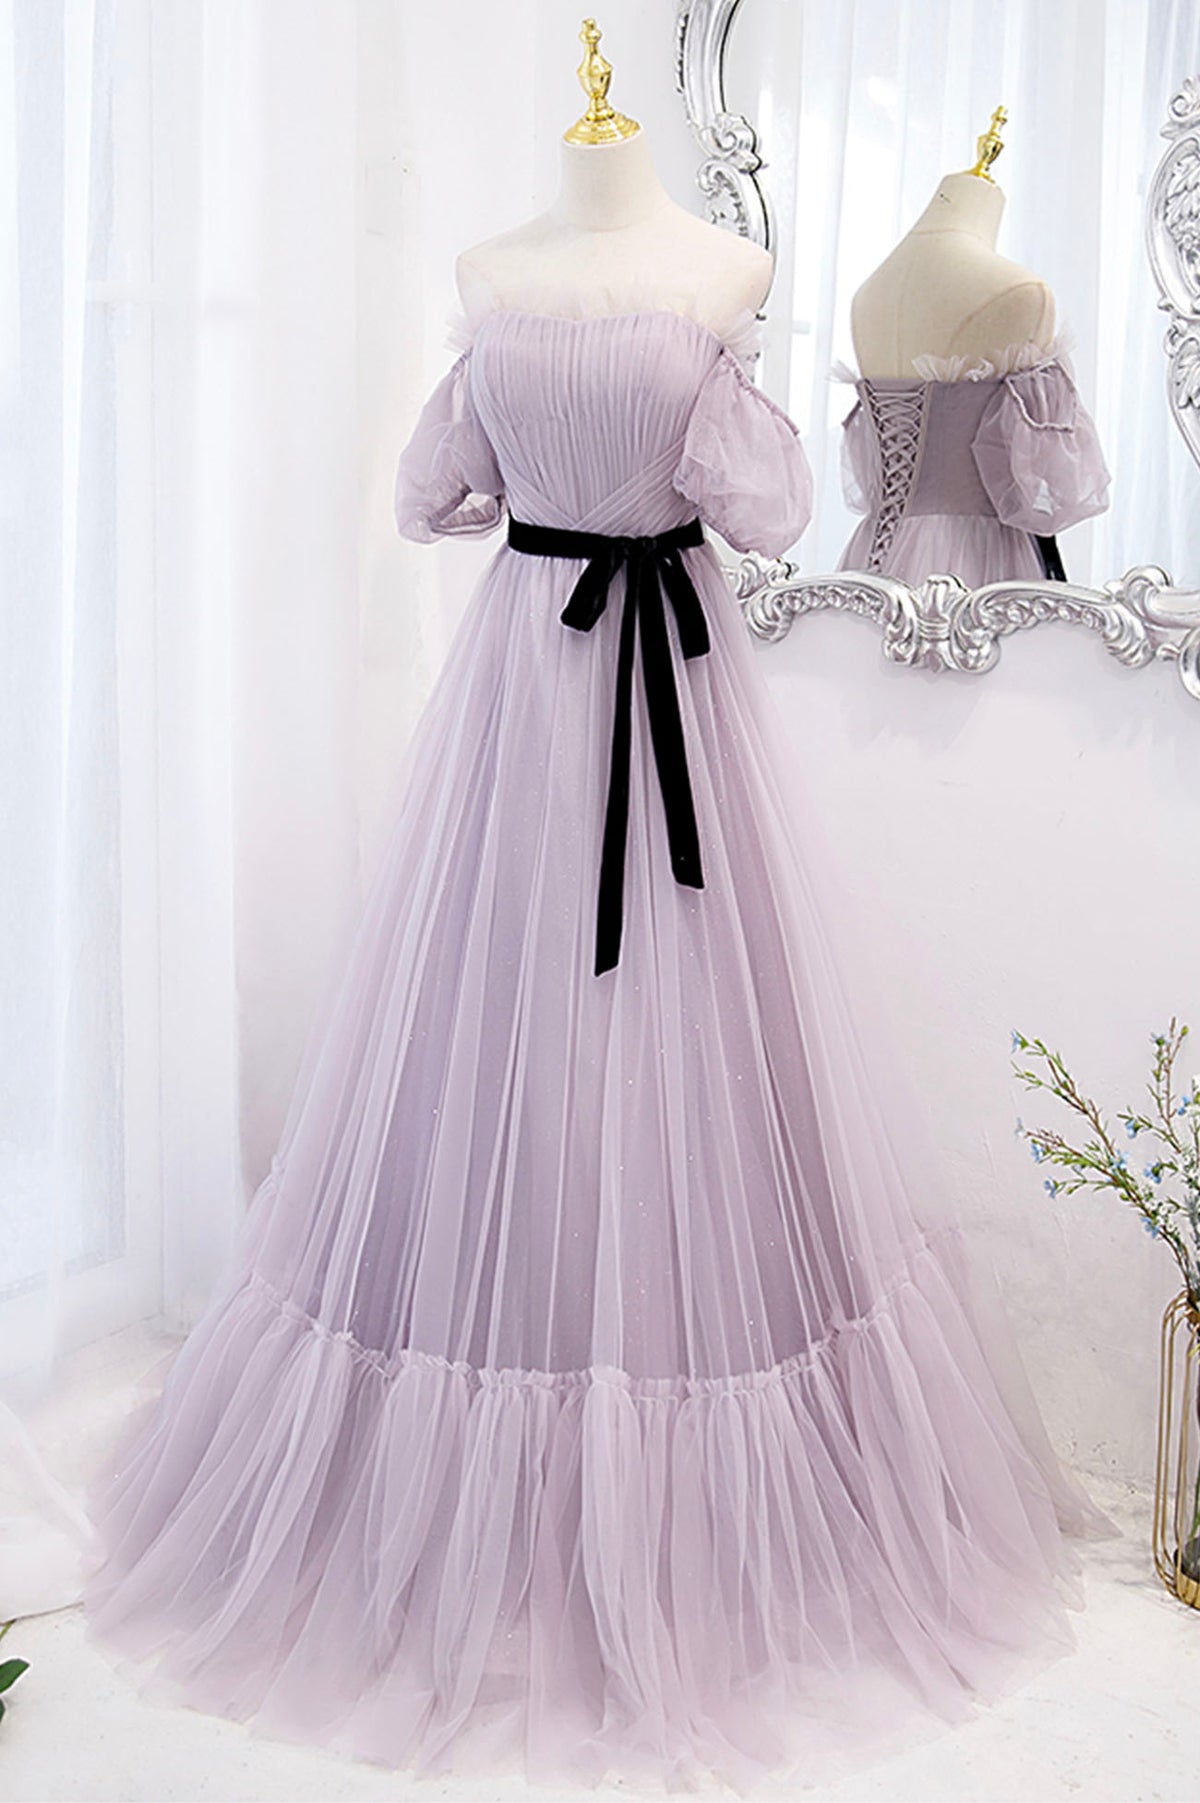 Tulle Dress for Women Formal Wedding Purple Sparkly Graduation Strapless  Tube Long Gown Evening Party Mesh Dress (Medium, Purple) 